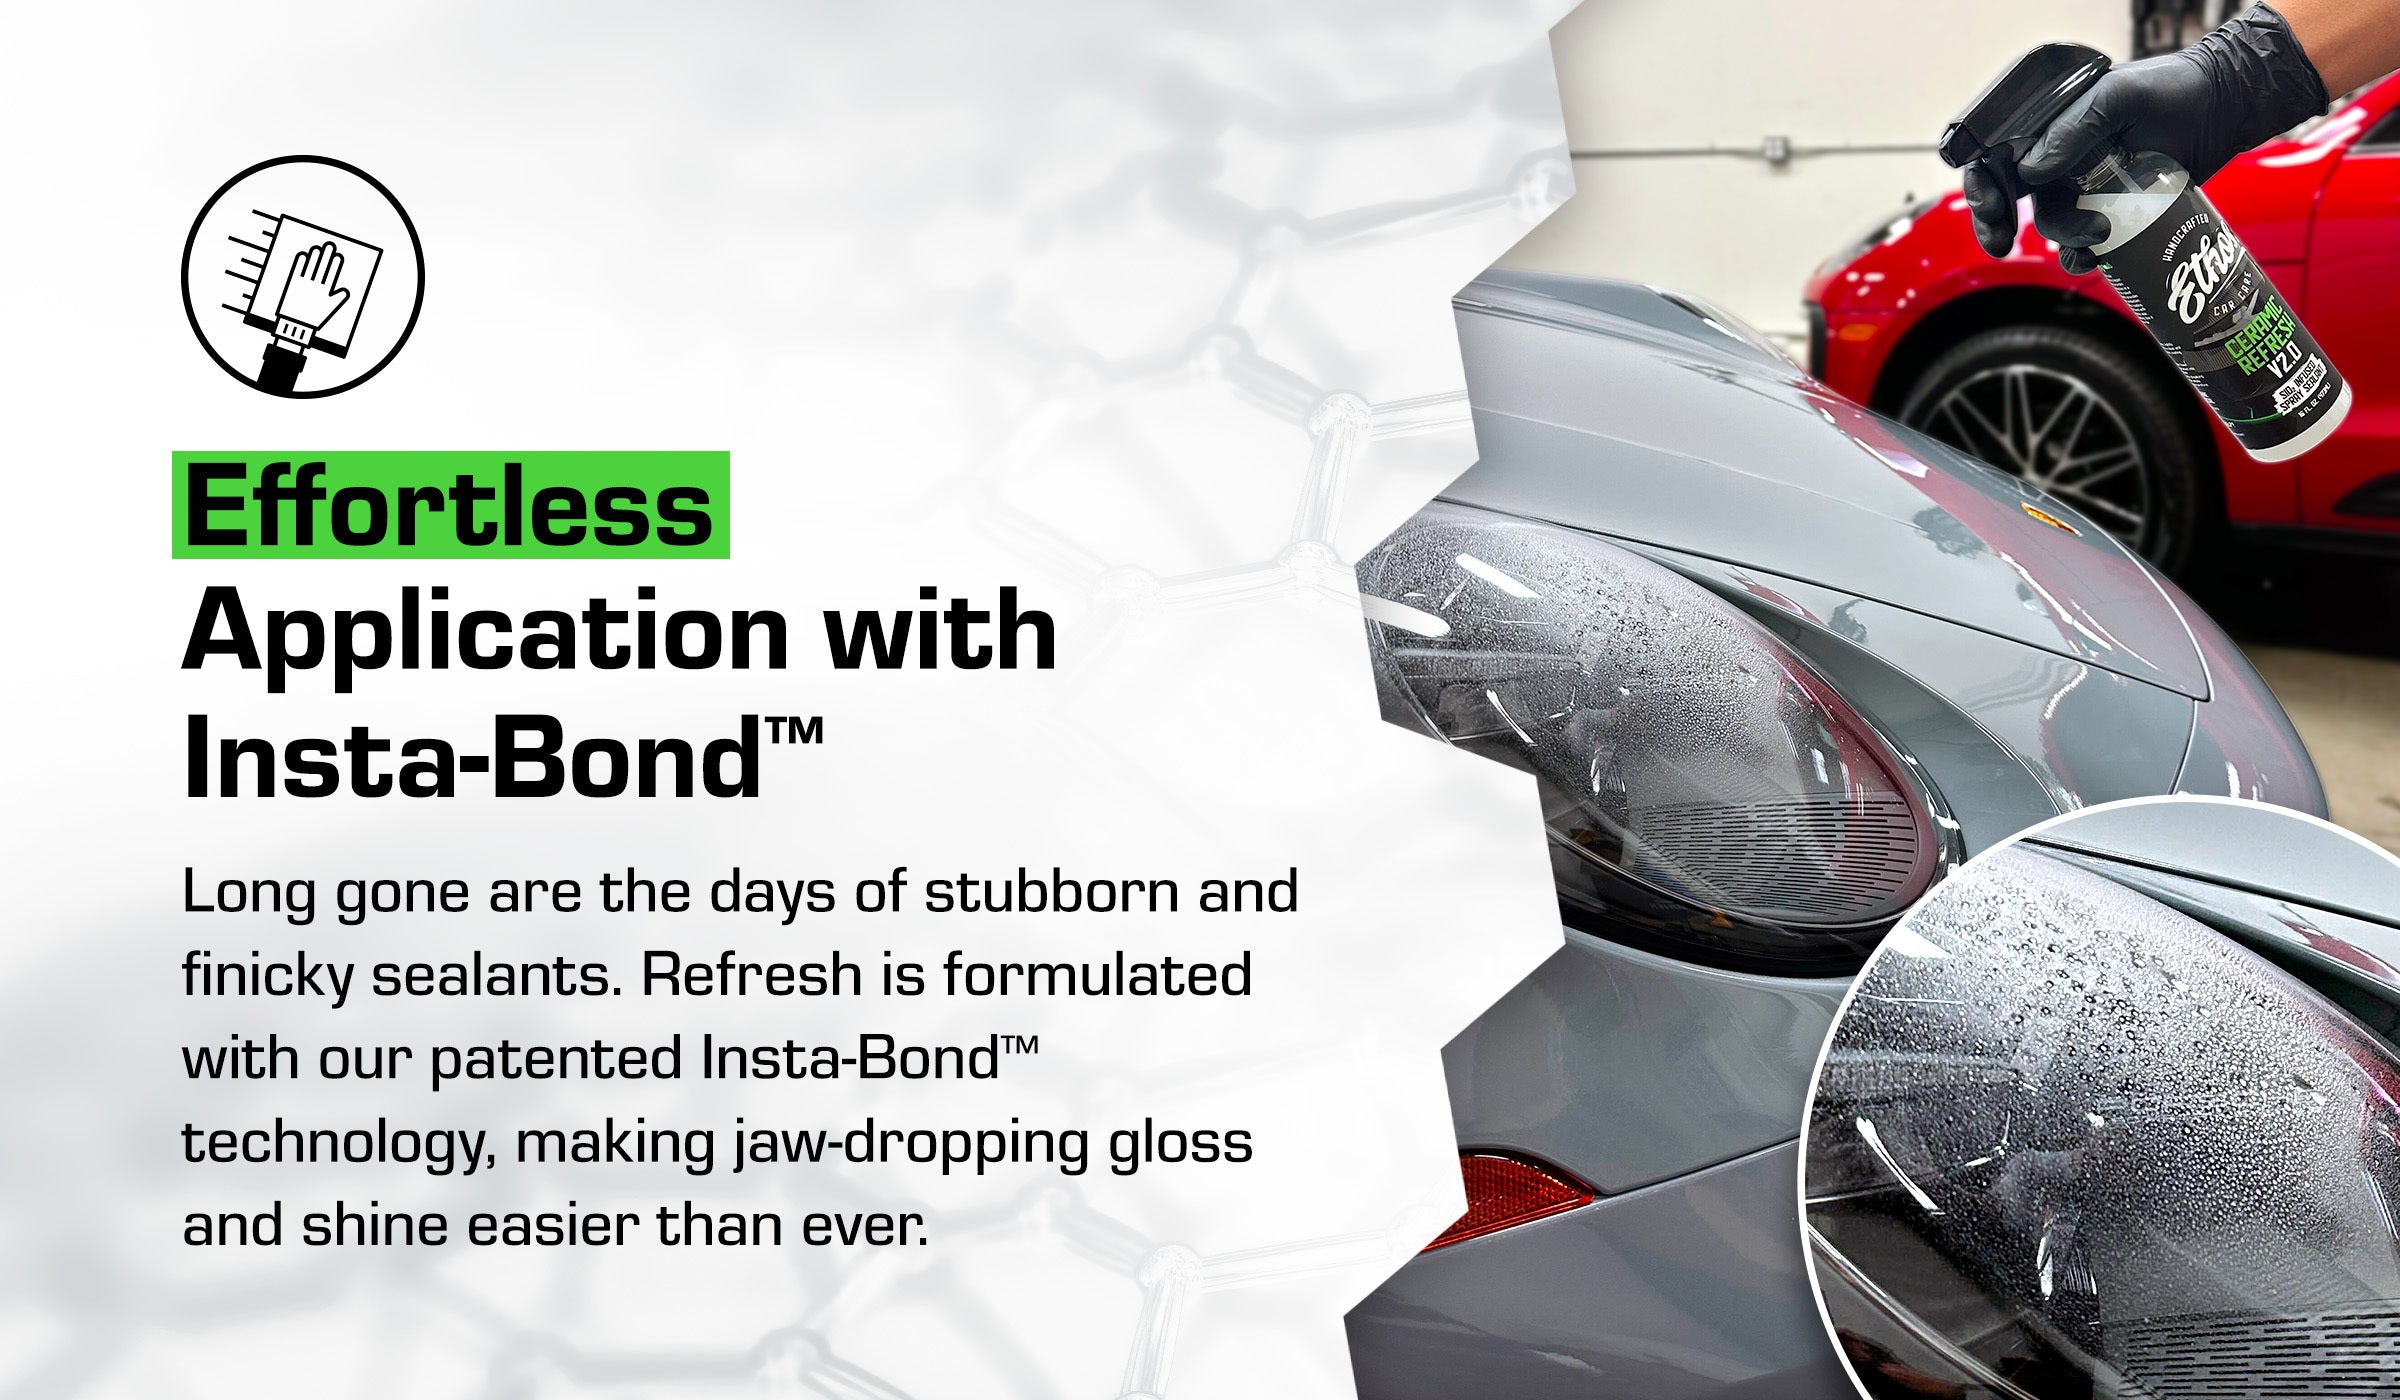 Hydro Boost Hardened Protection Adds A Durable Layer of Ceramic Si02 Protection | Boost Ceramic Paint Protection | Extend Life of Your Cars Ceramic